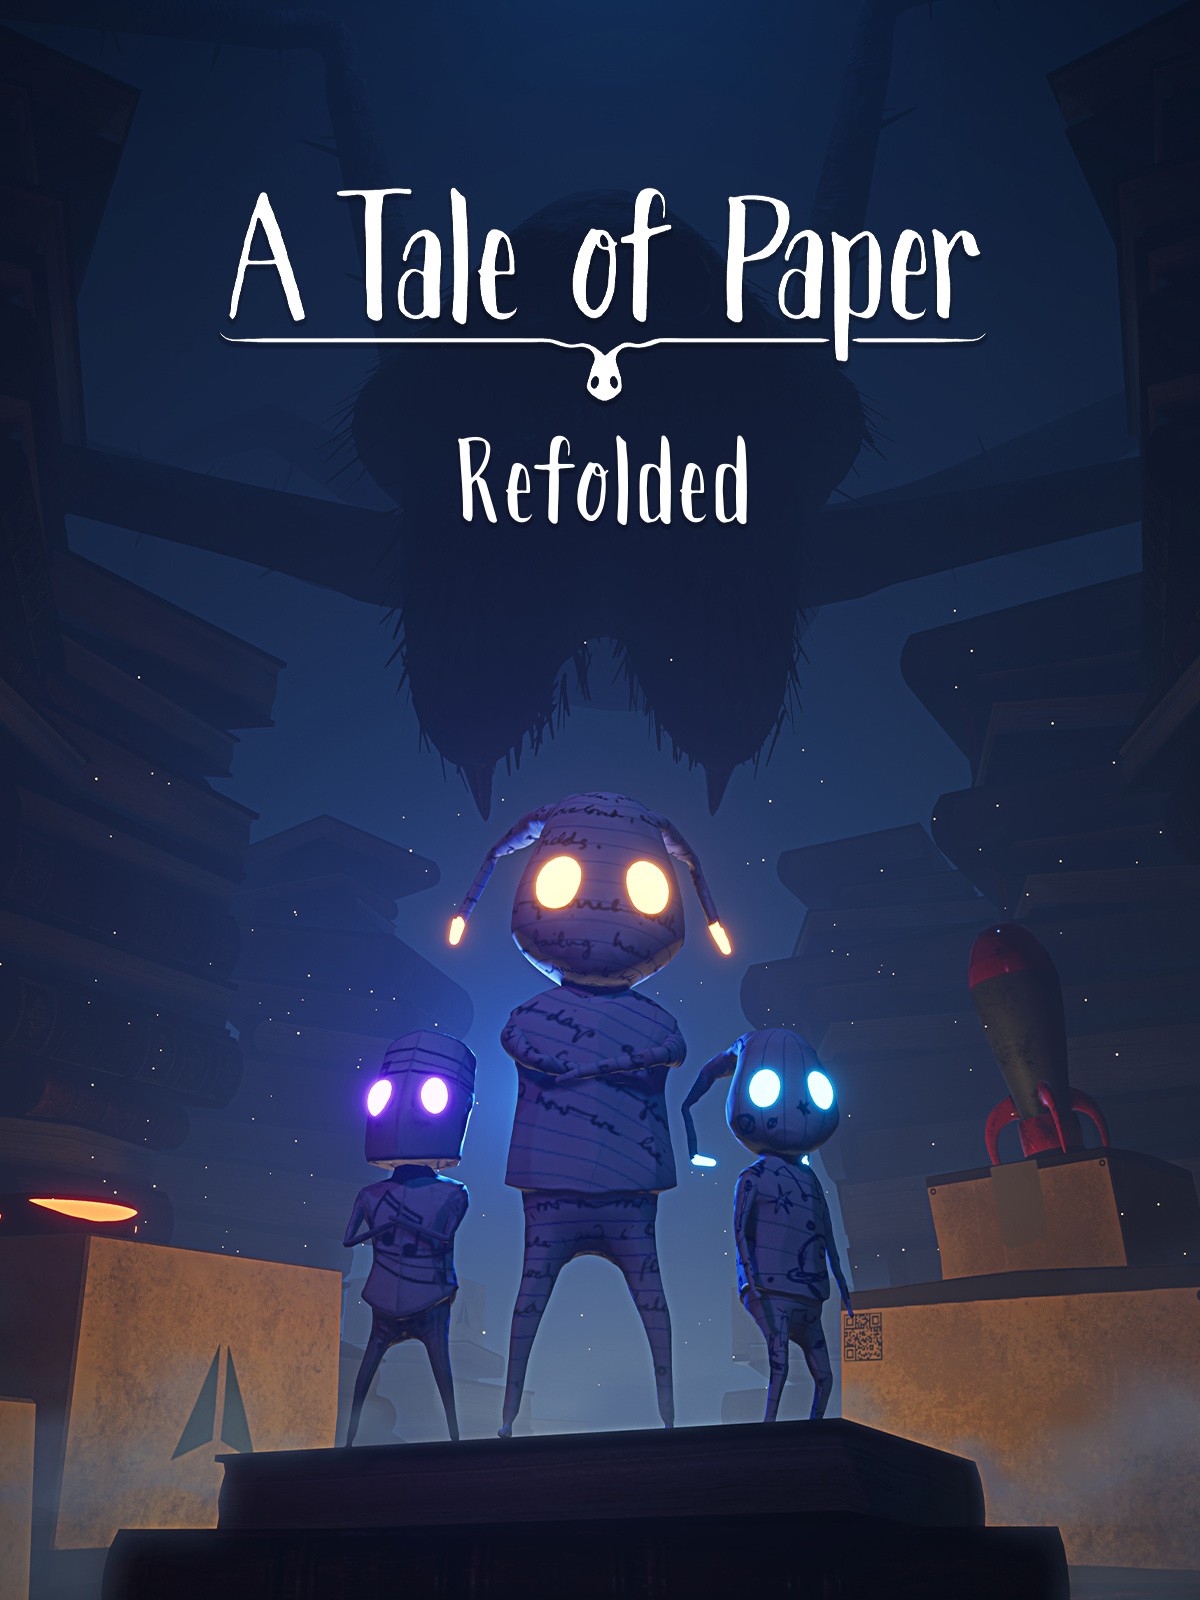 download-a-tale-of-paper--refolded-offer-7tv91